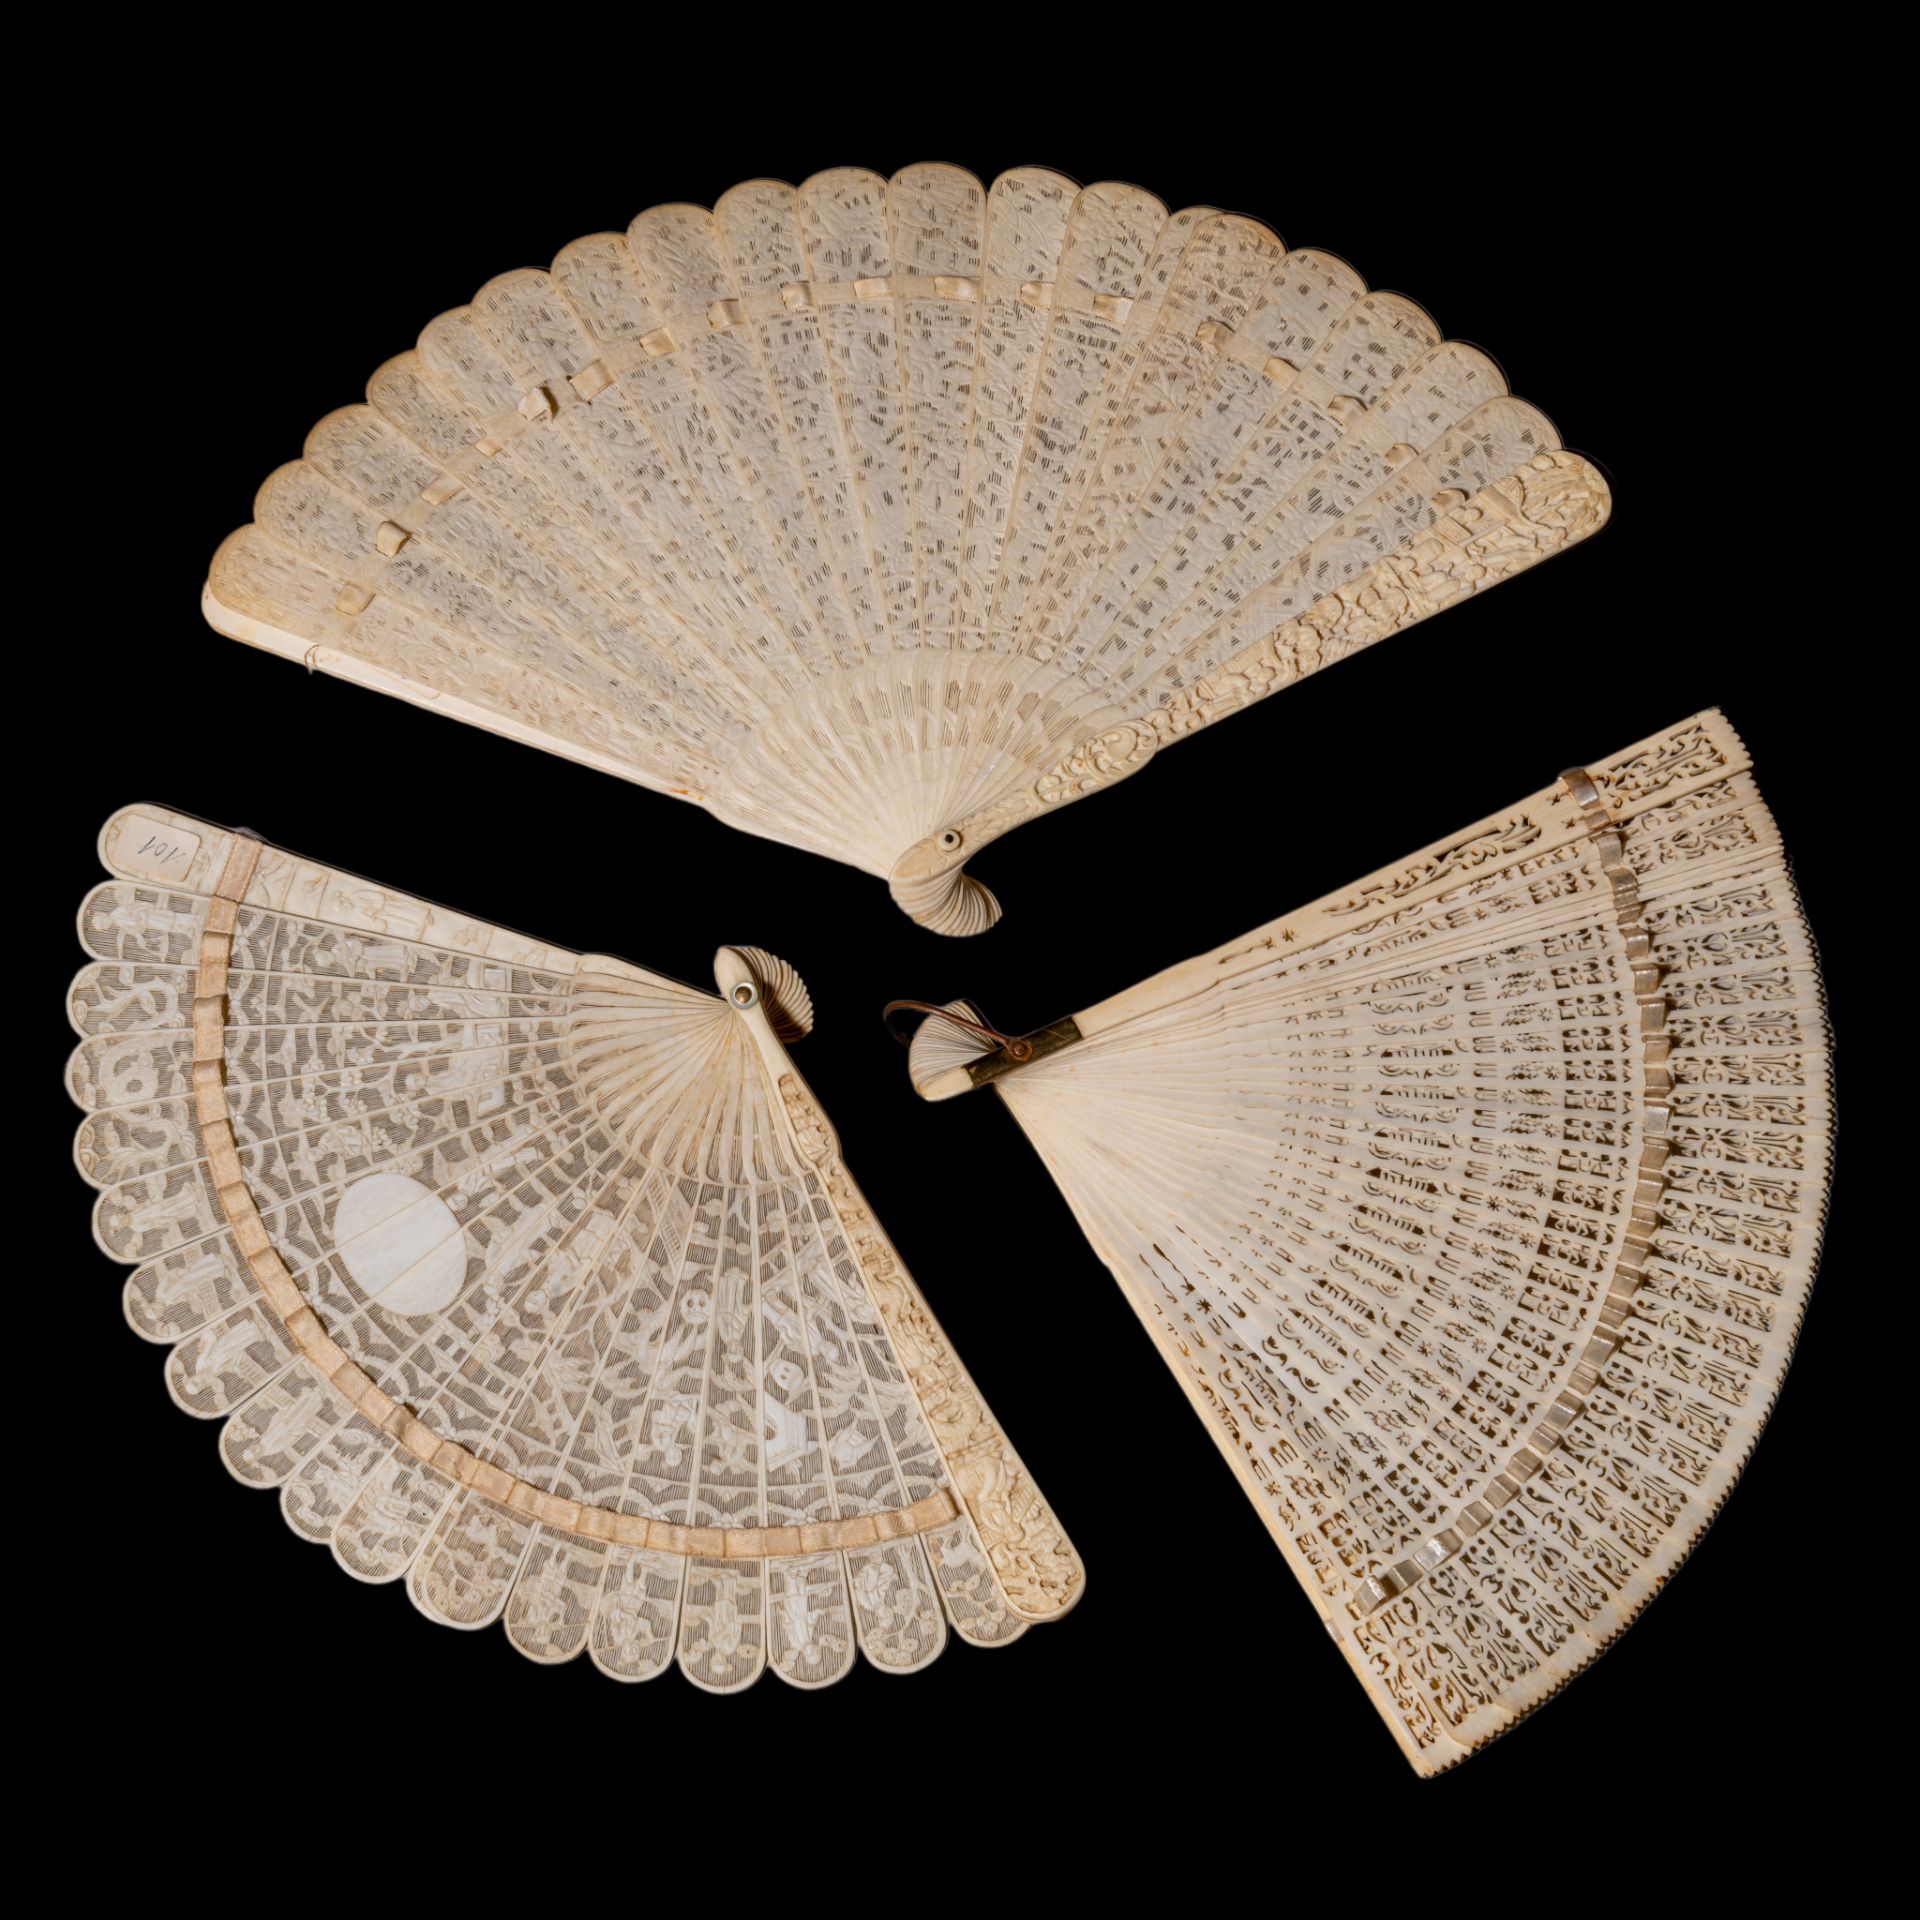 Three Chinese late Qing / early Republic ivory fans, H 16,4 - 19,4 - 20,3 cm / 39 - 77 - 54 g. - W f